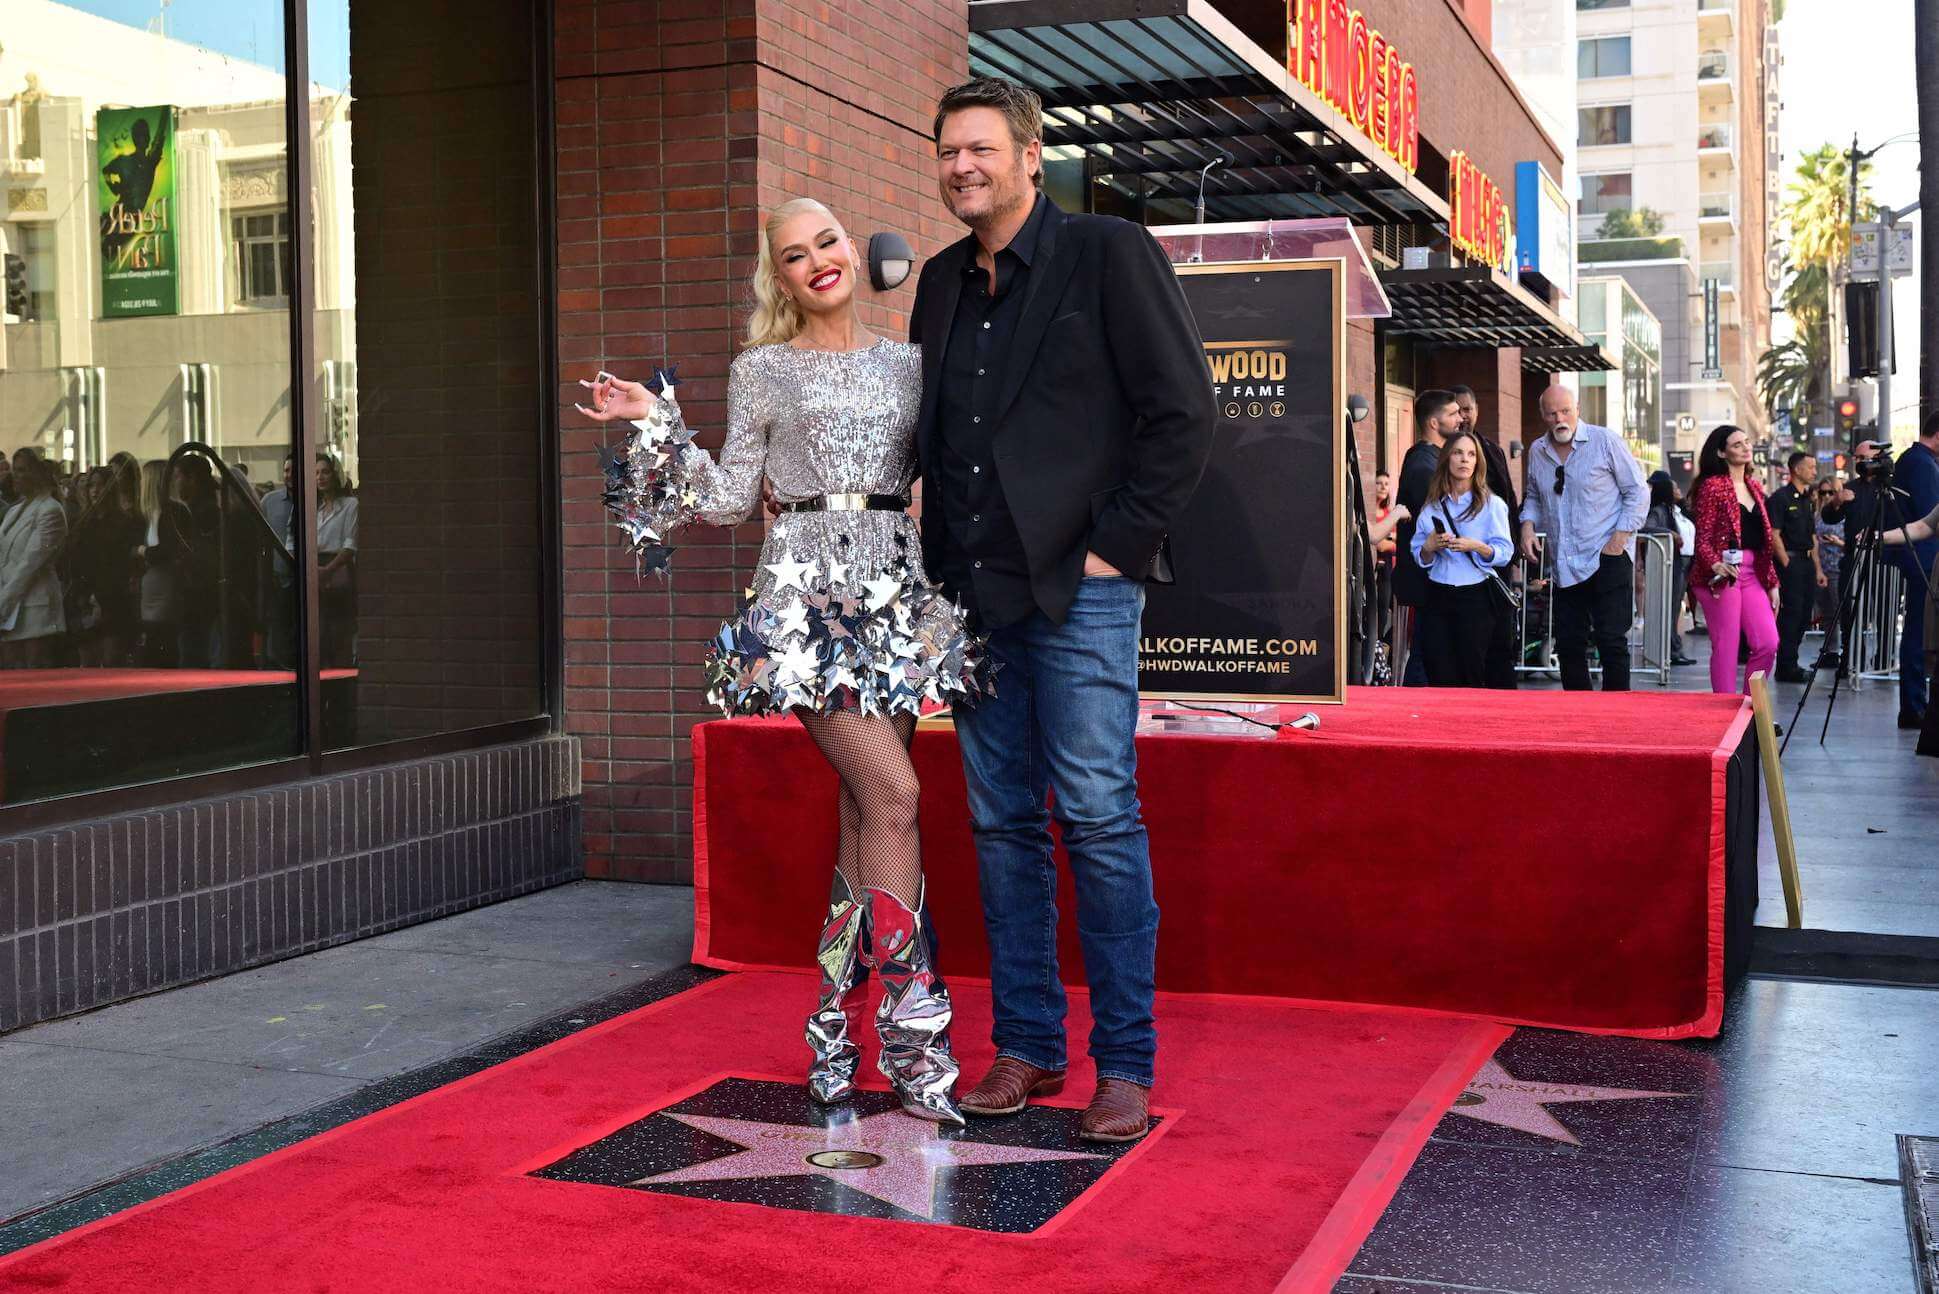 'The Voice' stars Blake Shelton and Gwen Stefani standing together on the Hollywood Walk of Fame